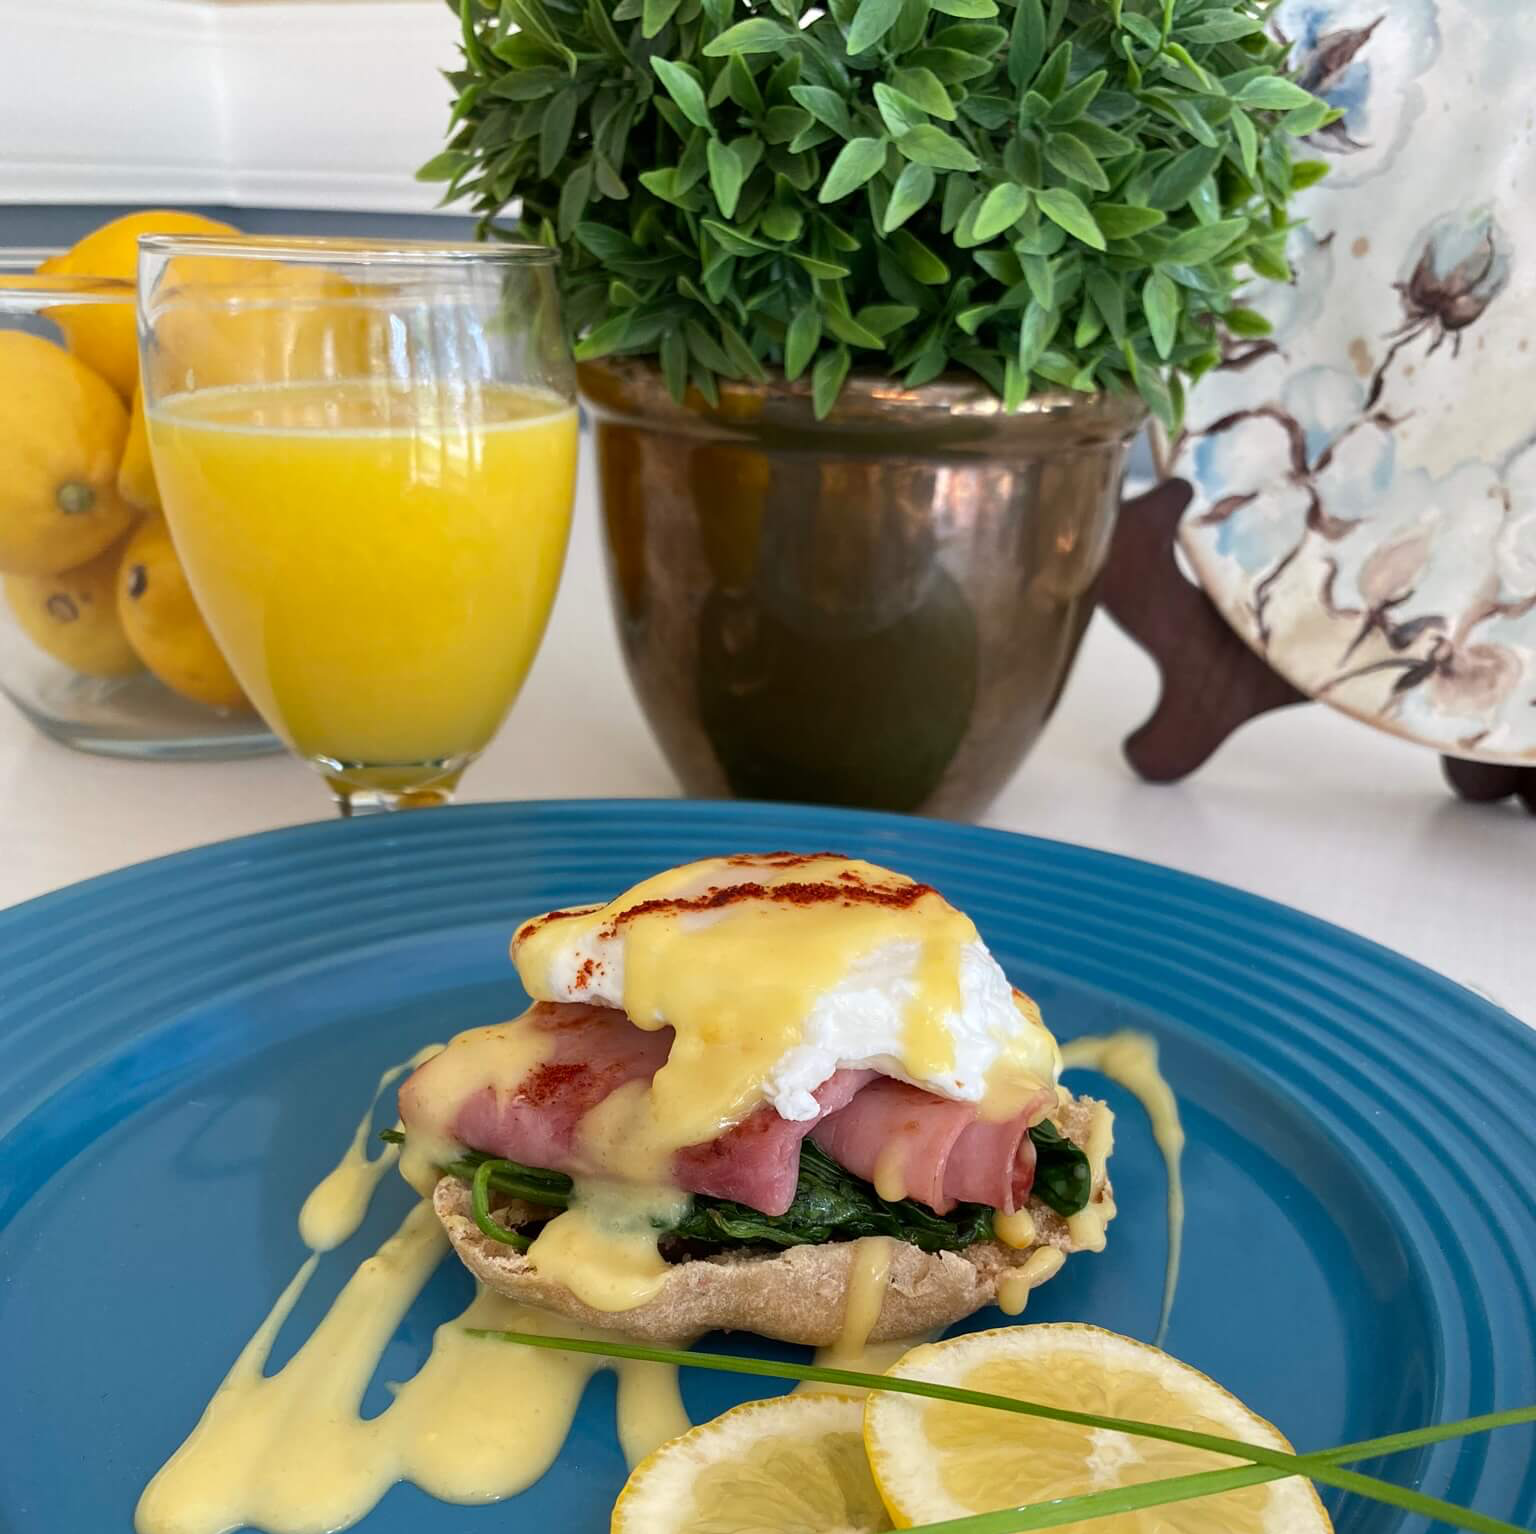 eggs benedict displayed on bright blue plate made fresh by retirement community chef